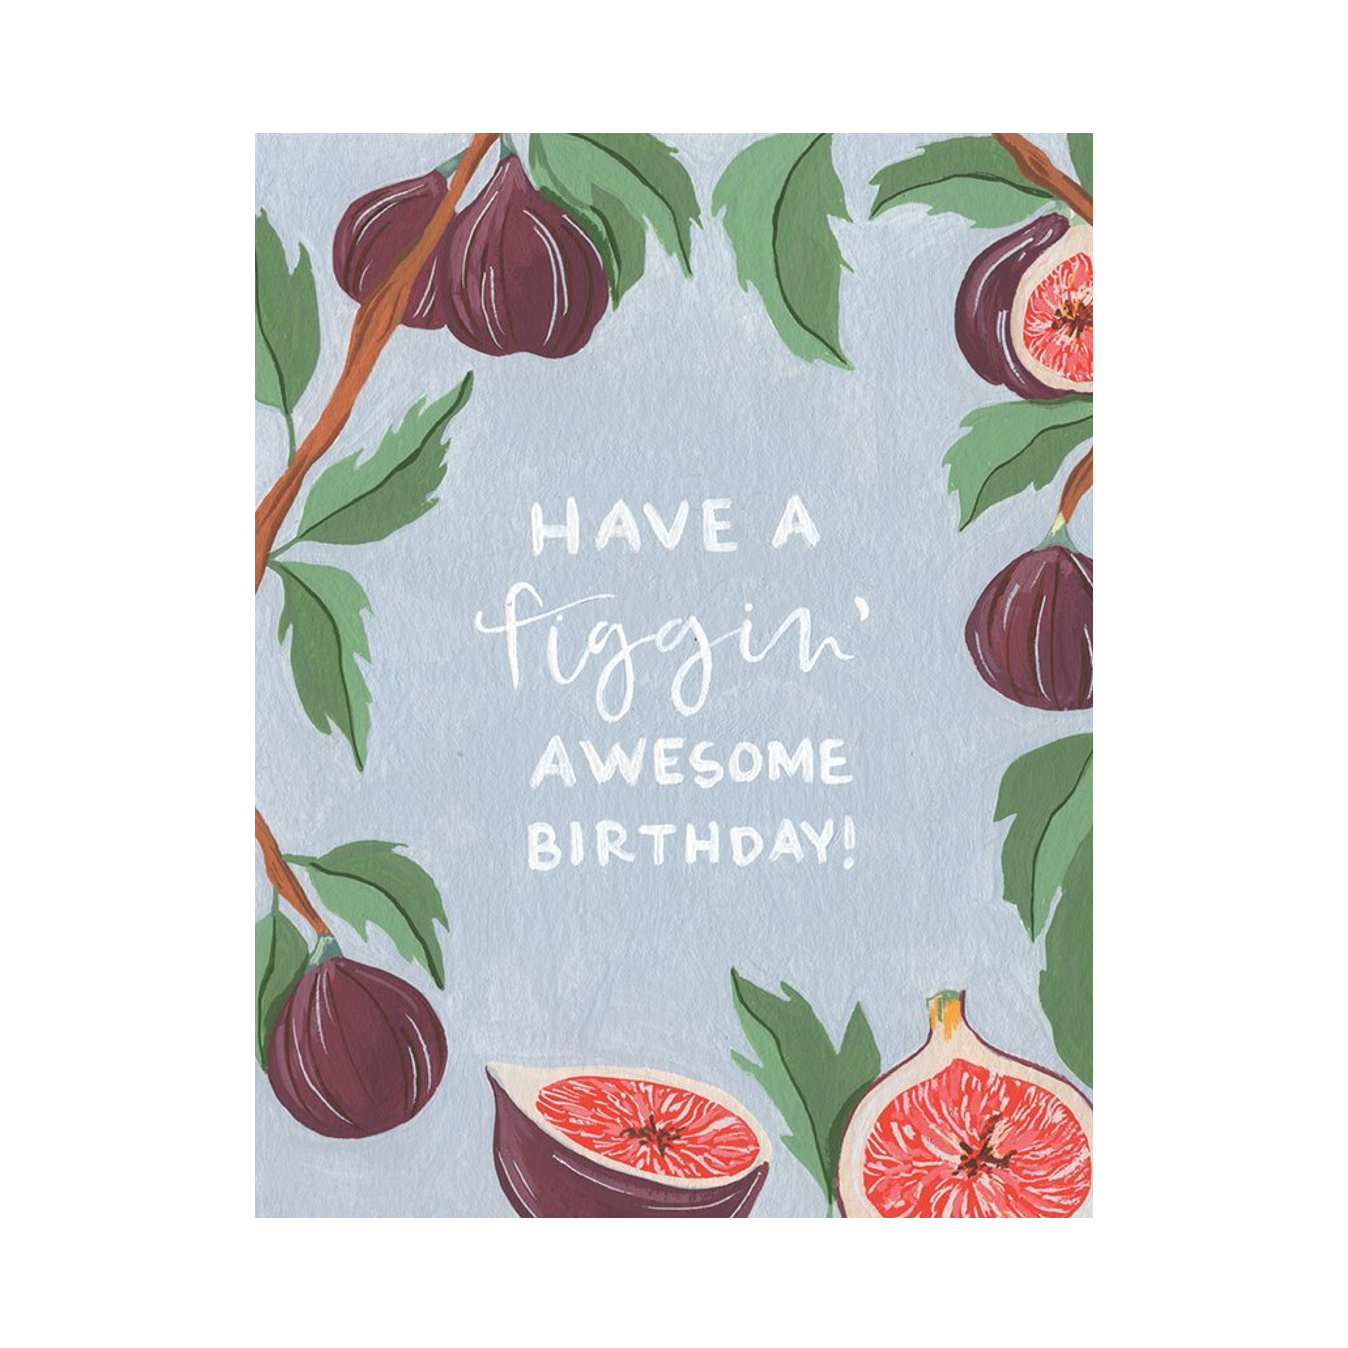 Have A Figgin' Awesome Birthday! Card